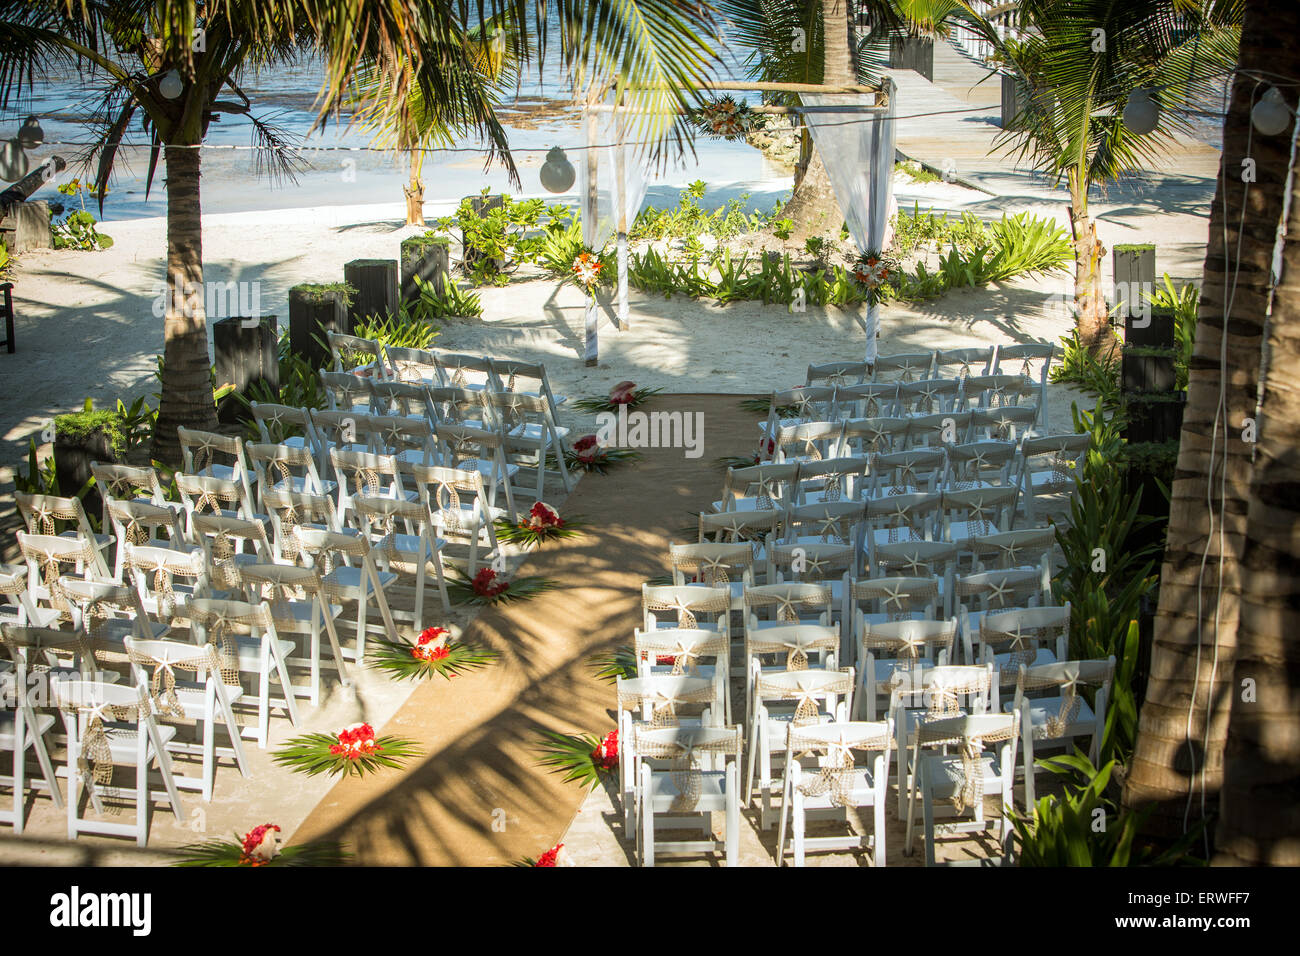 Wedding ceremony location on the beach at the Las Terrazas Resort and Residences on the island of Ambergris Caye, Belize. Stock Photo